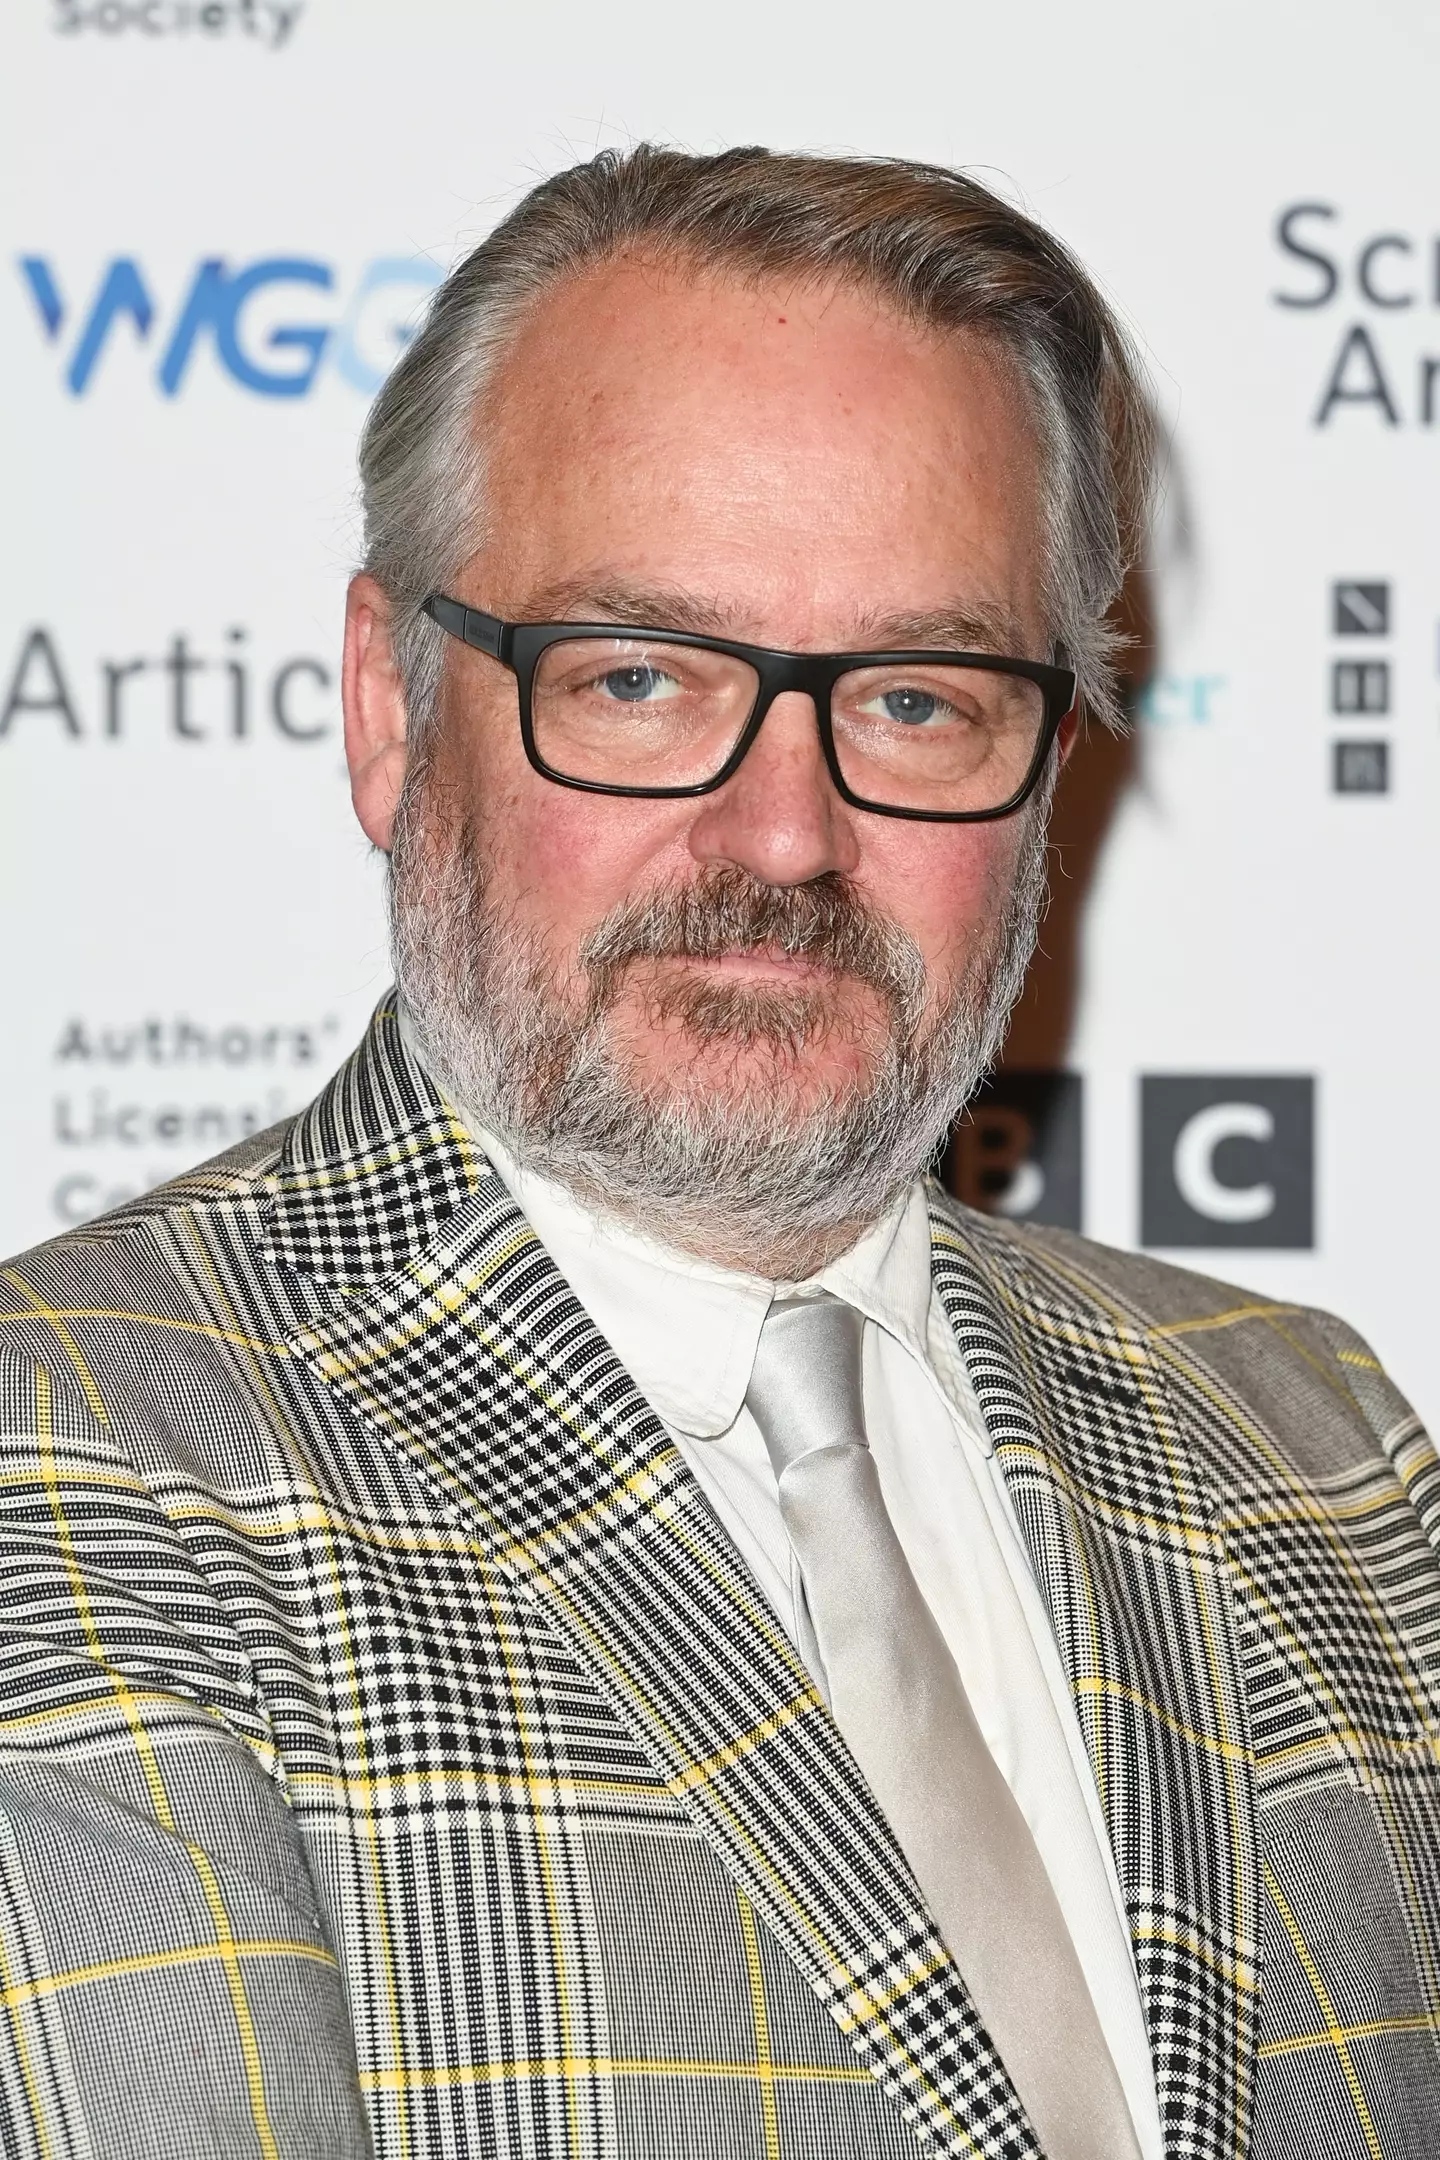 Charlie Higson shocked his followers after sharing a payslip. (Kate Green/Getty Images)